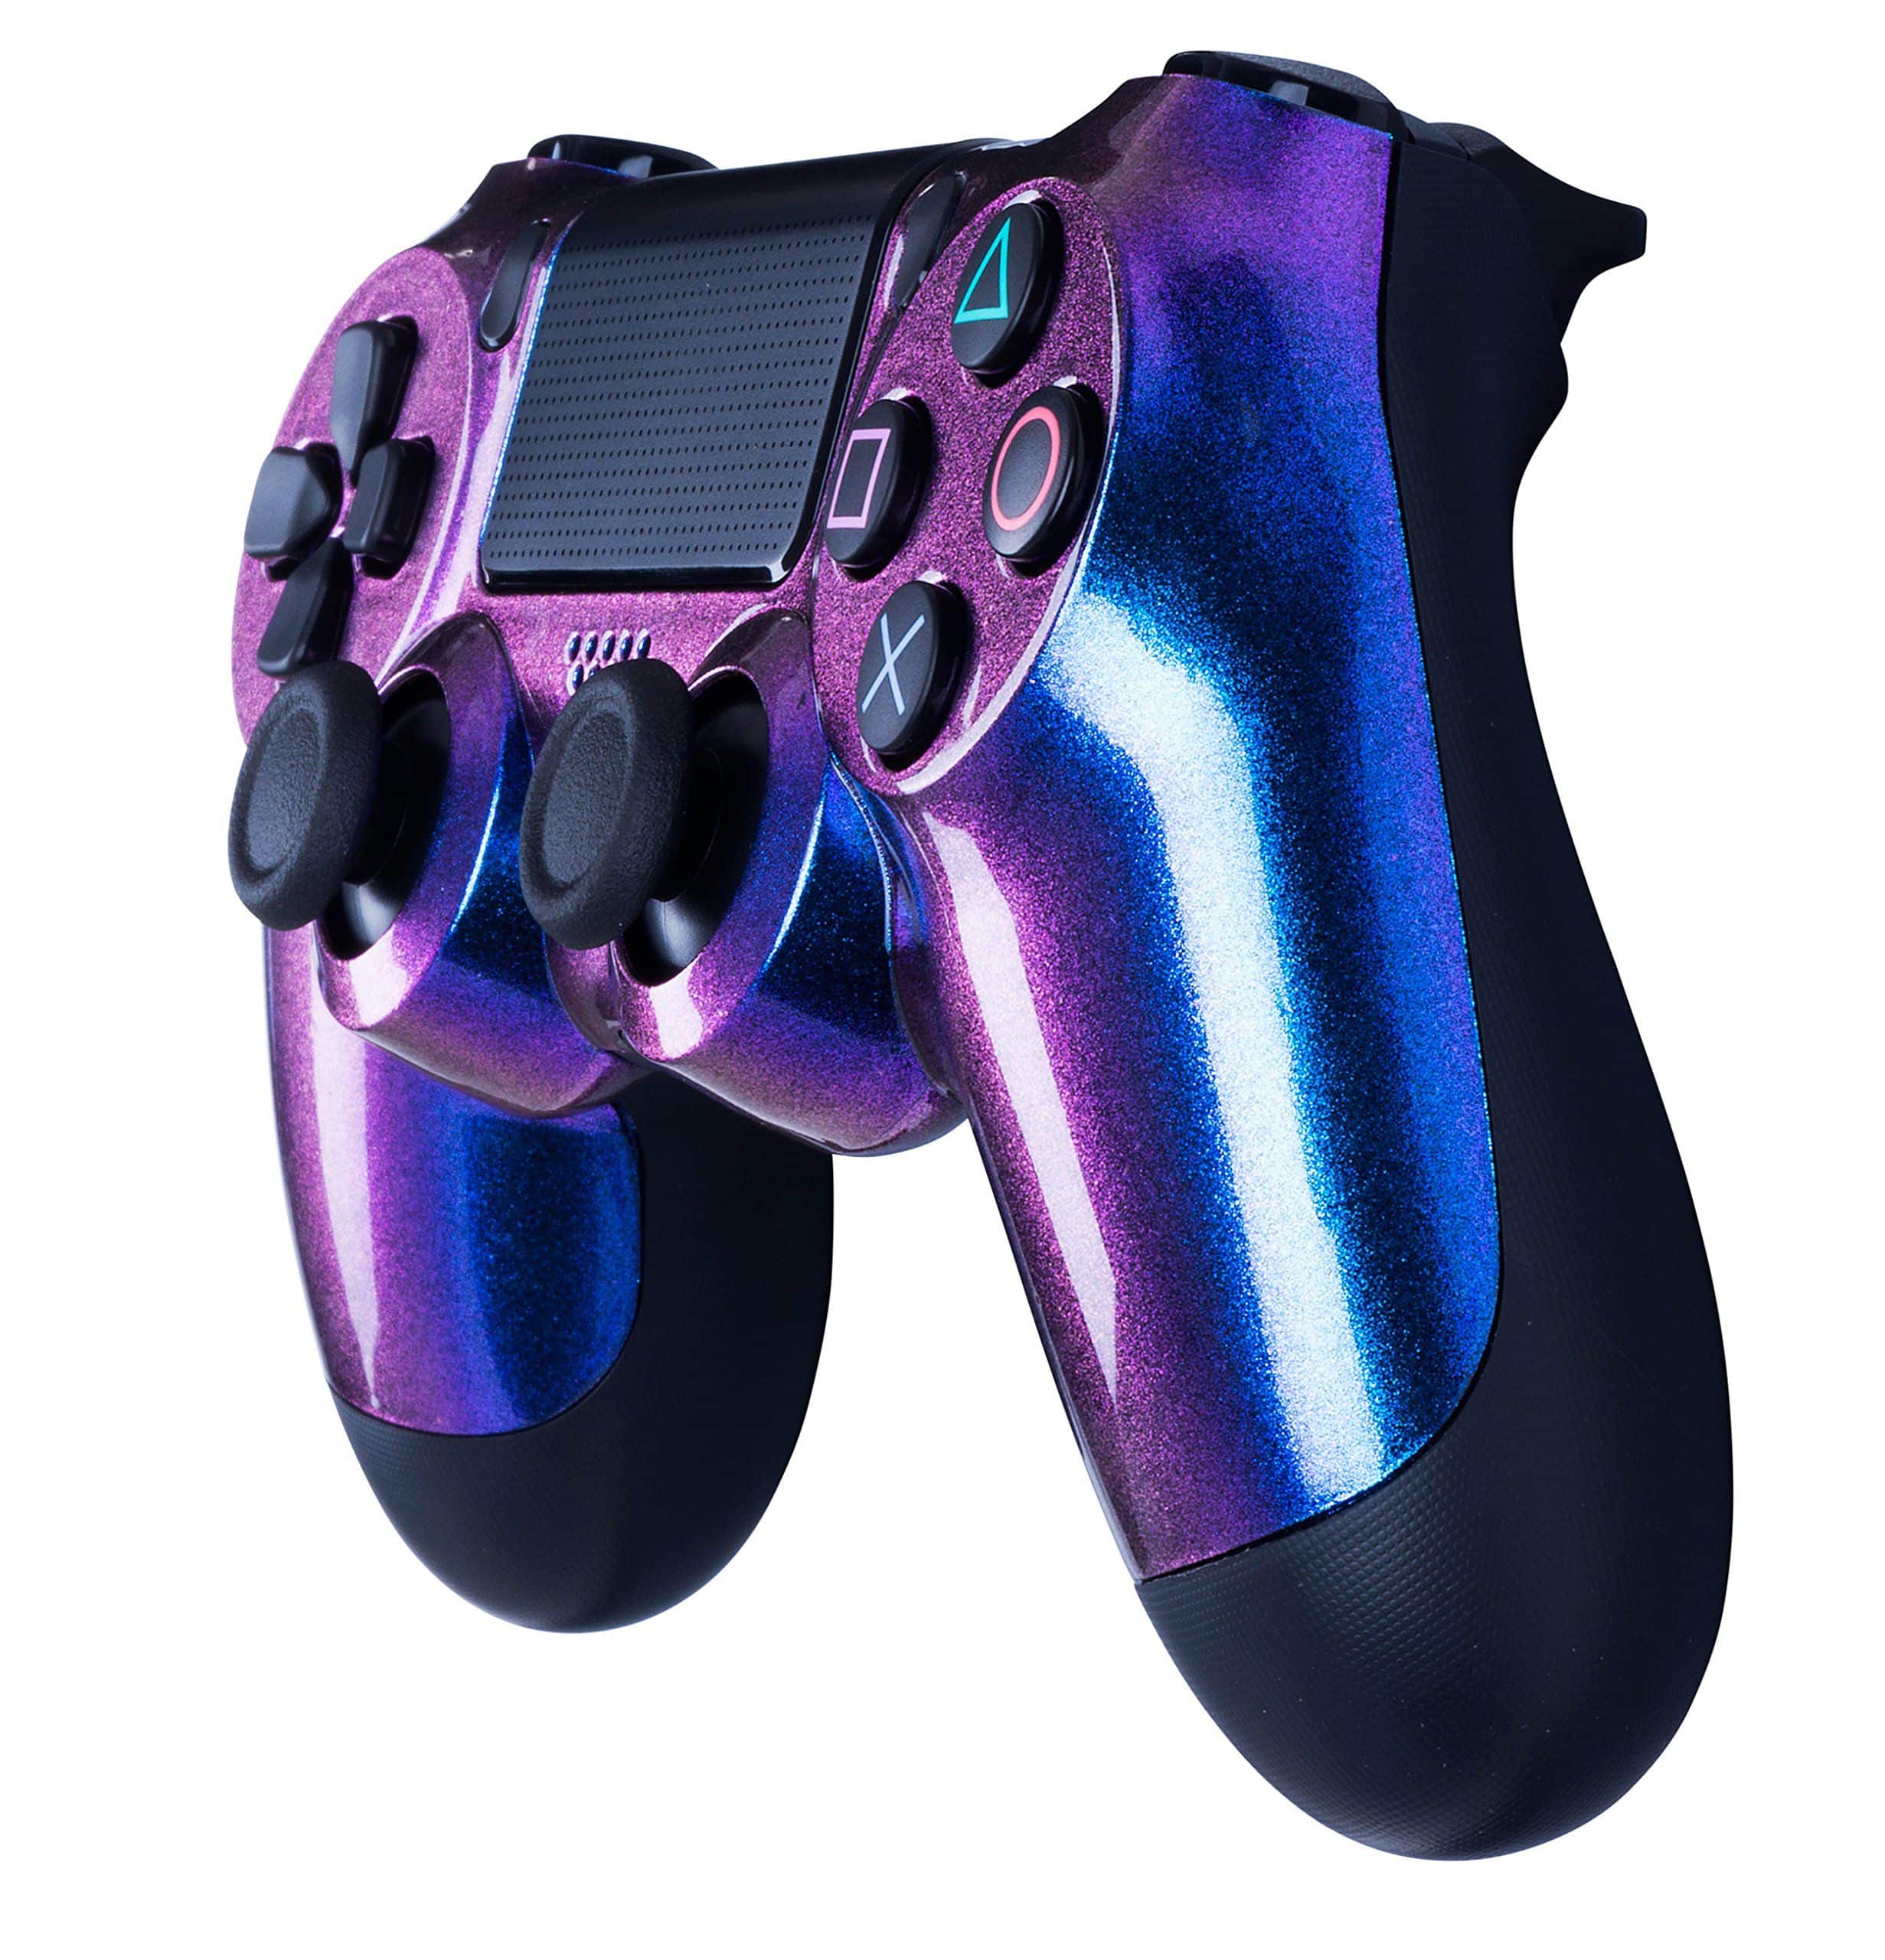 DualShock 4 Wireless Controller for PlayStation 4 Color Changing ...